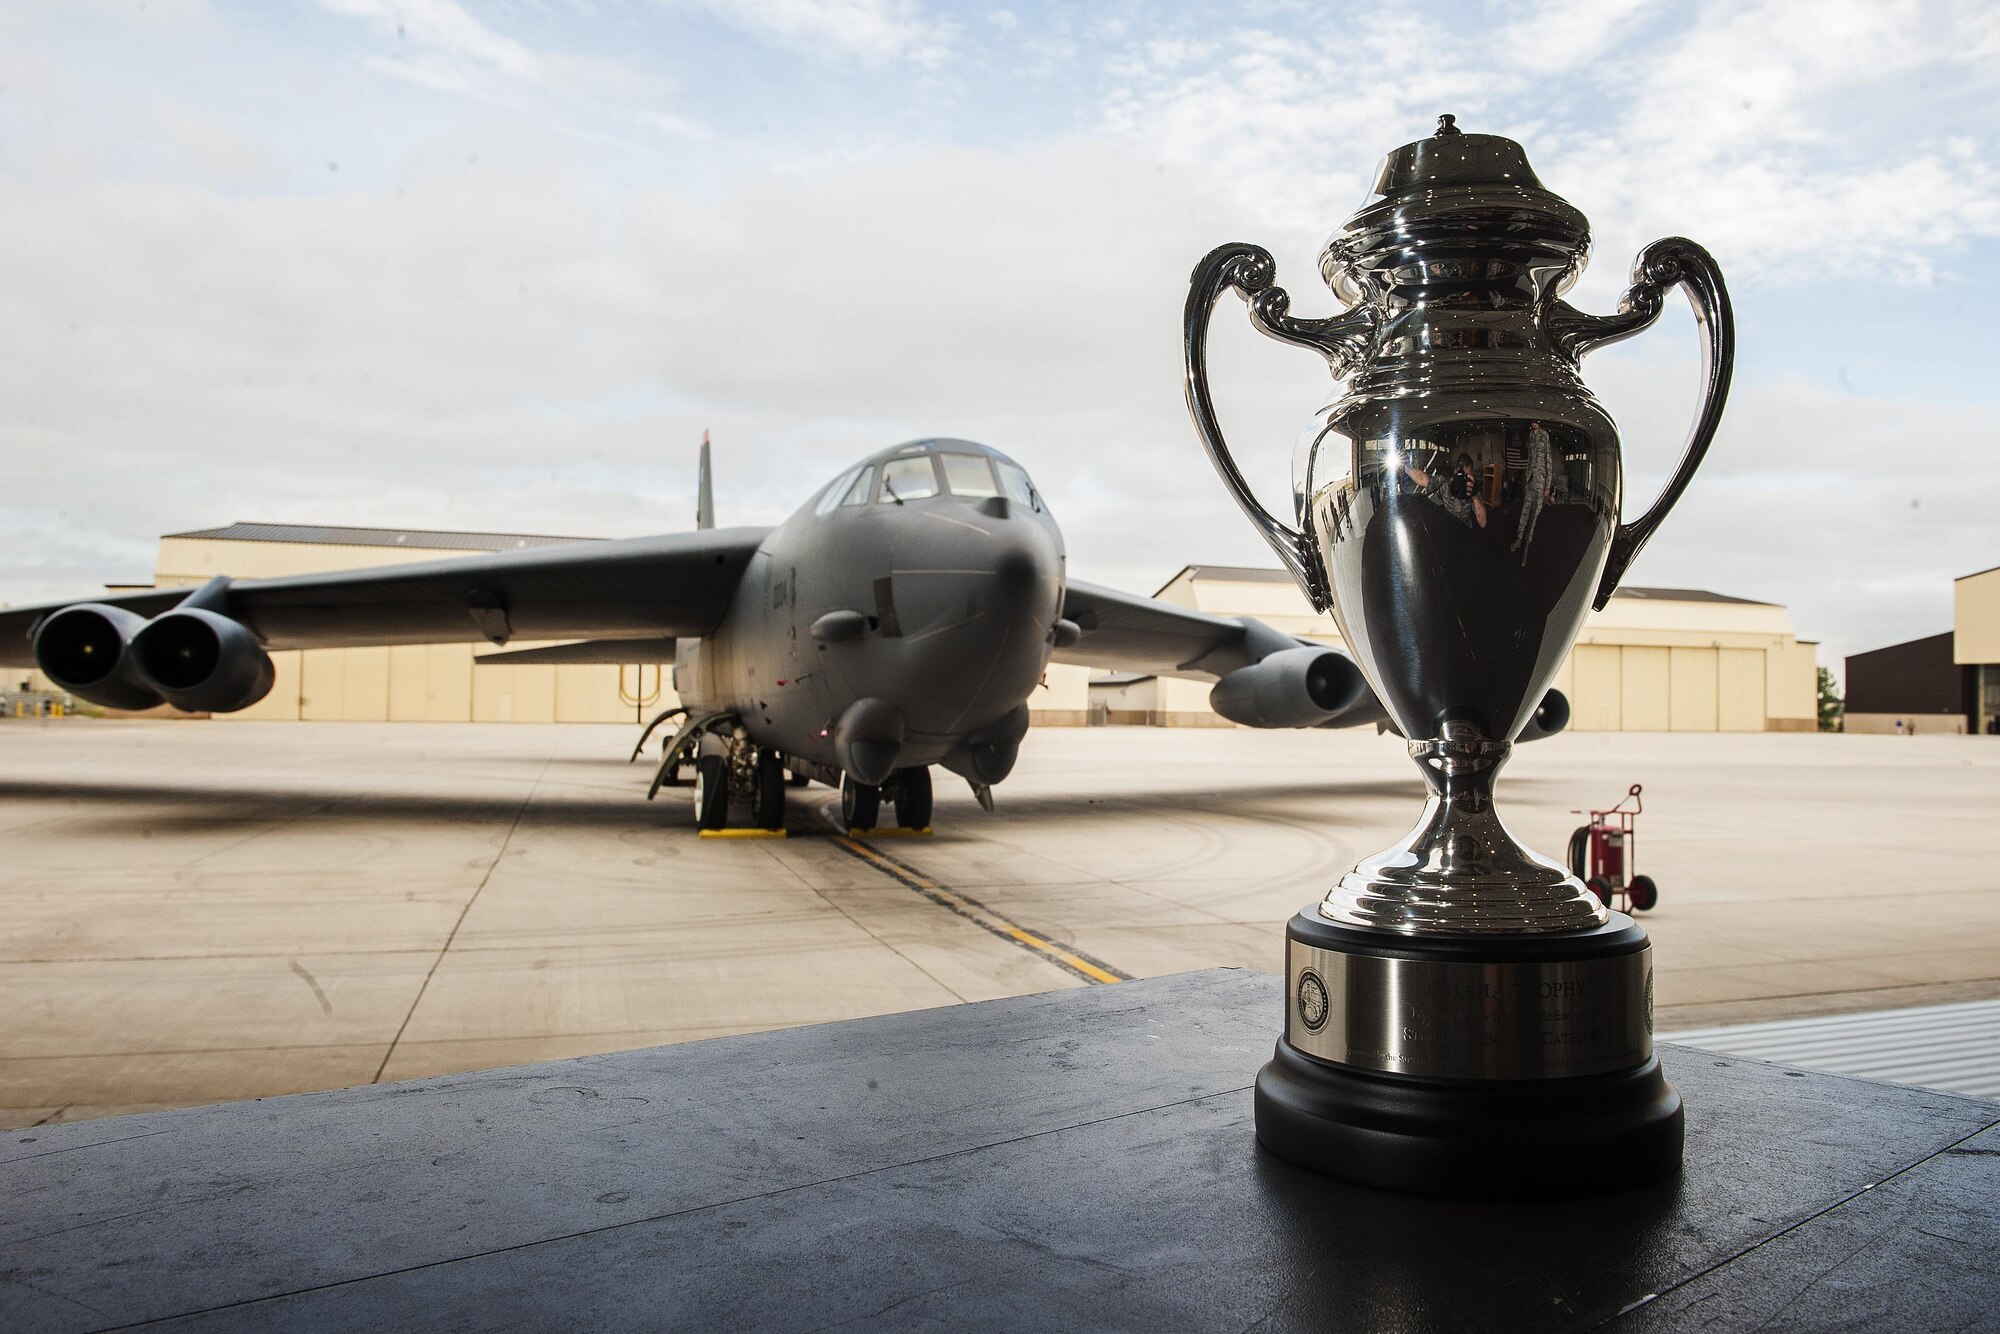 The Omaha Trophy stands in front of a B-52H Stratofortress at Minot Air Force Base, N.D., June 6, 2017. Gen. John E. Hyten, U.S. Strategic Command commander, presented the 5th Bomb Wing with the 2017 Omaha Trophy in the Strategic Bomber. (U.S. Air Force photo/Senior Airman J.T. Armstrong)
